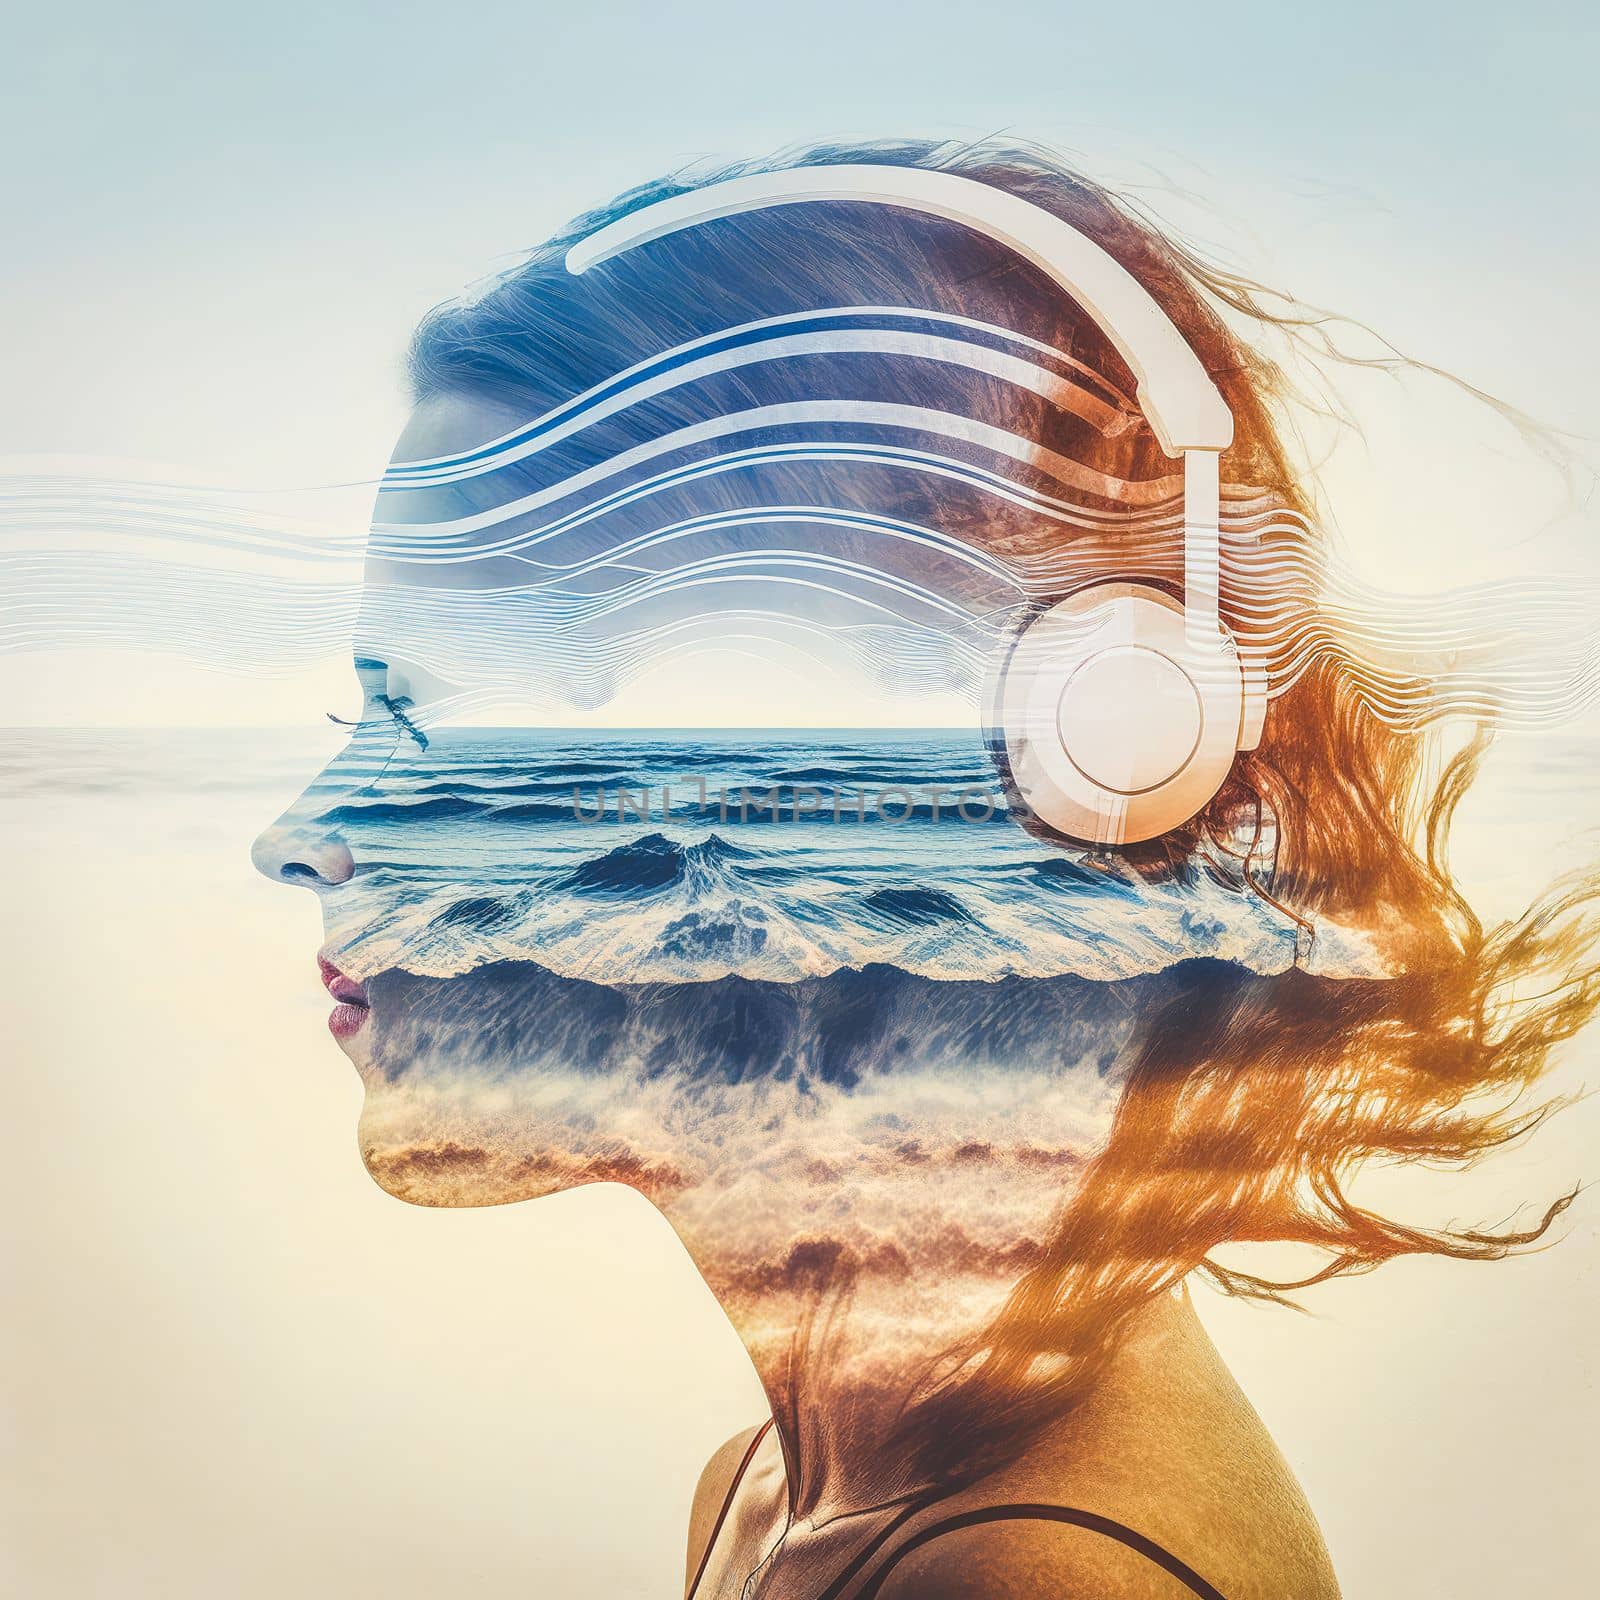 Sedate oceanic double exposure portrait woman in headphone listening to music. by biancoblue